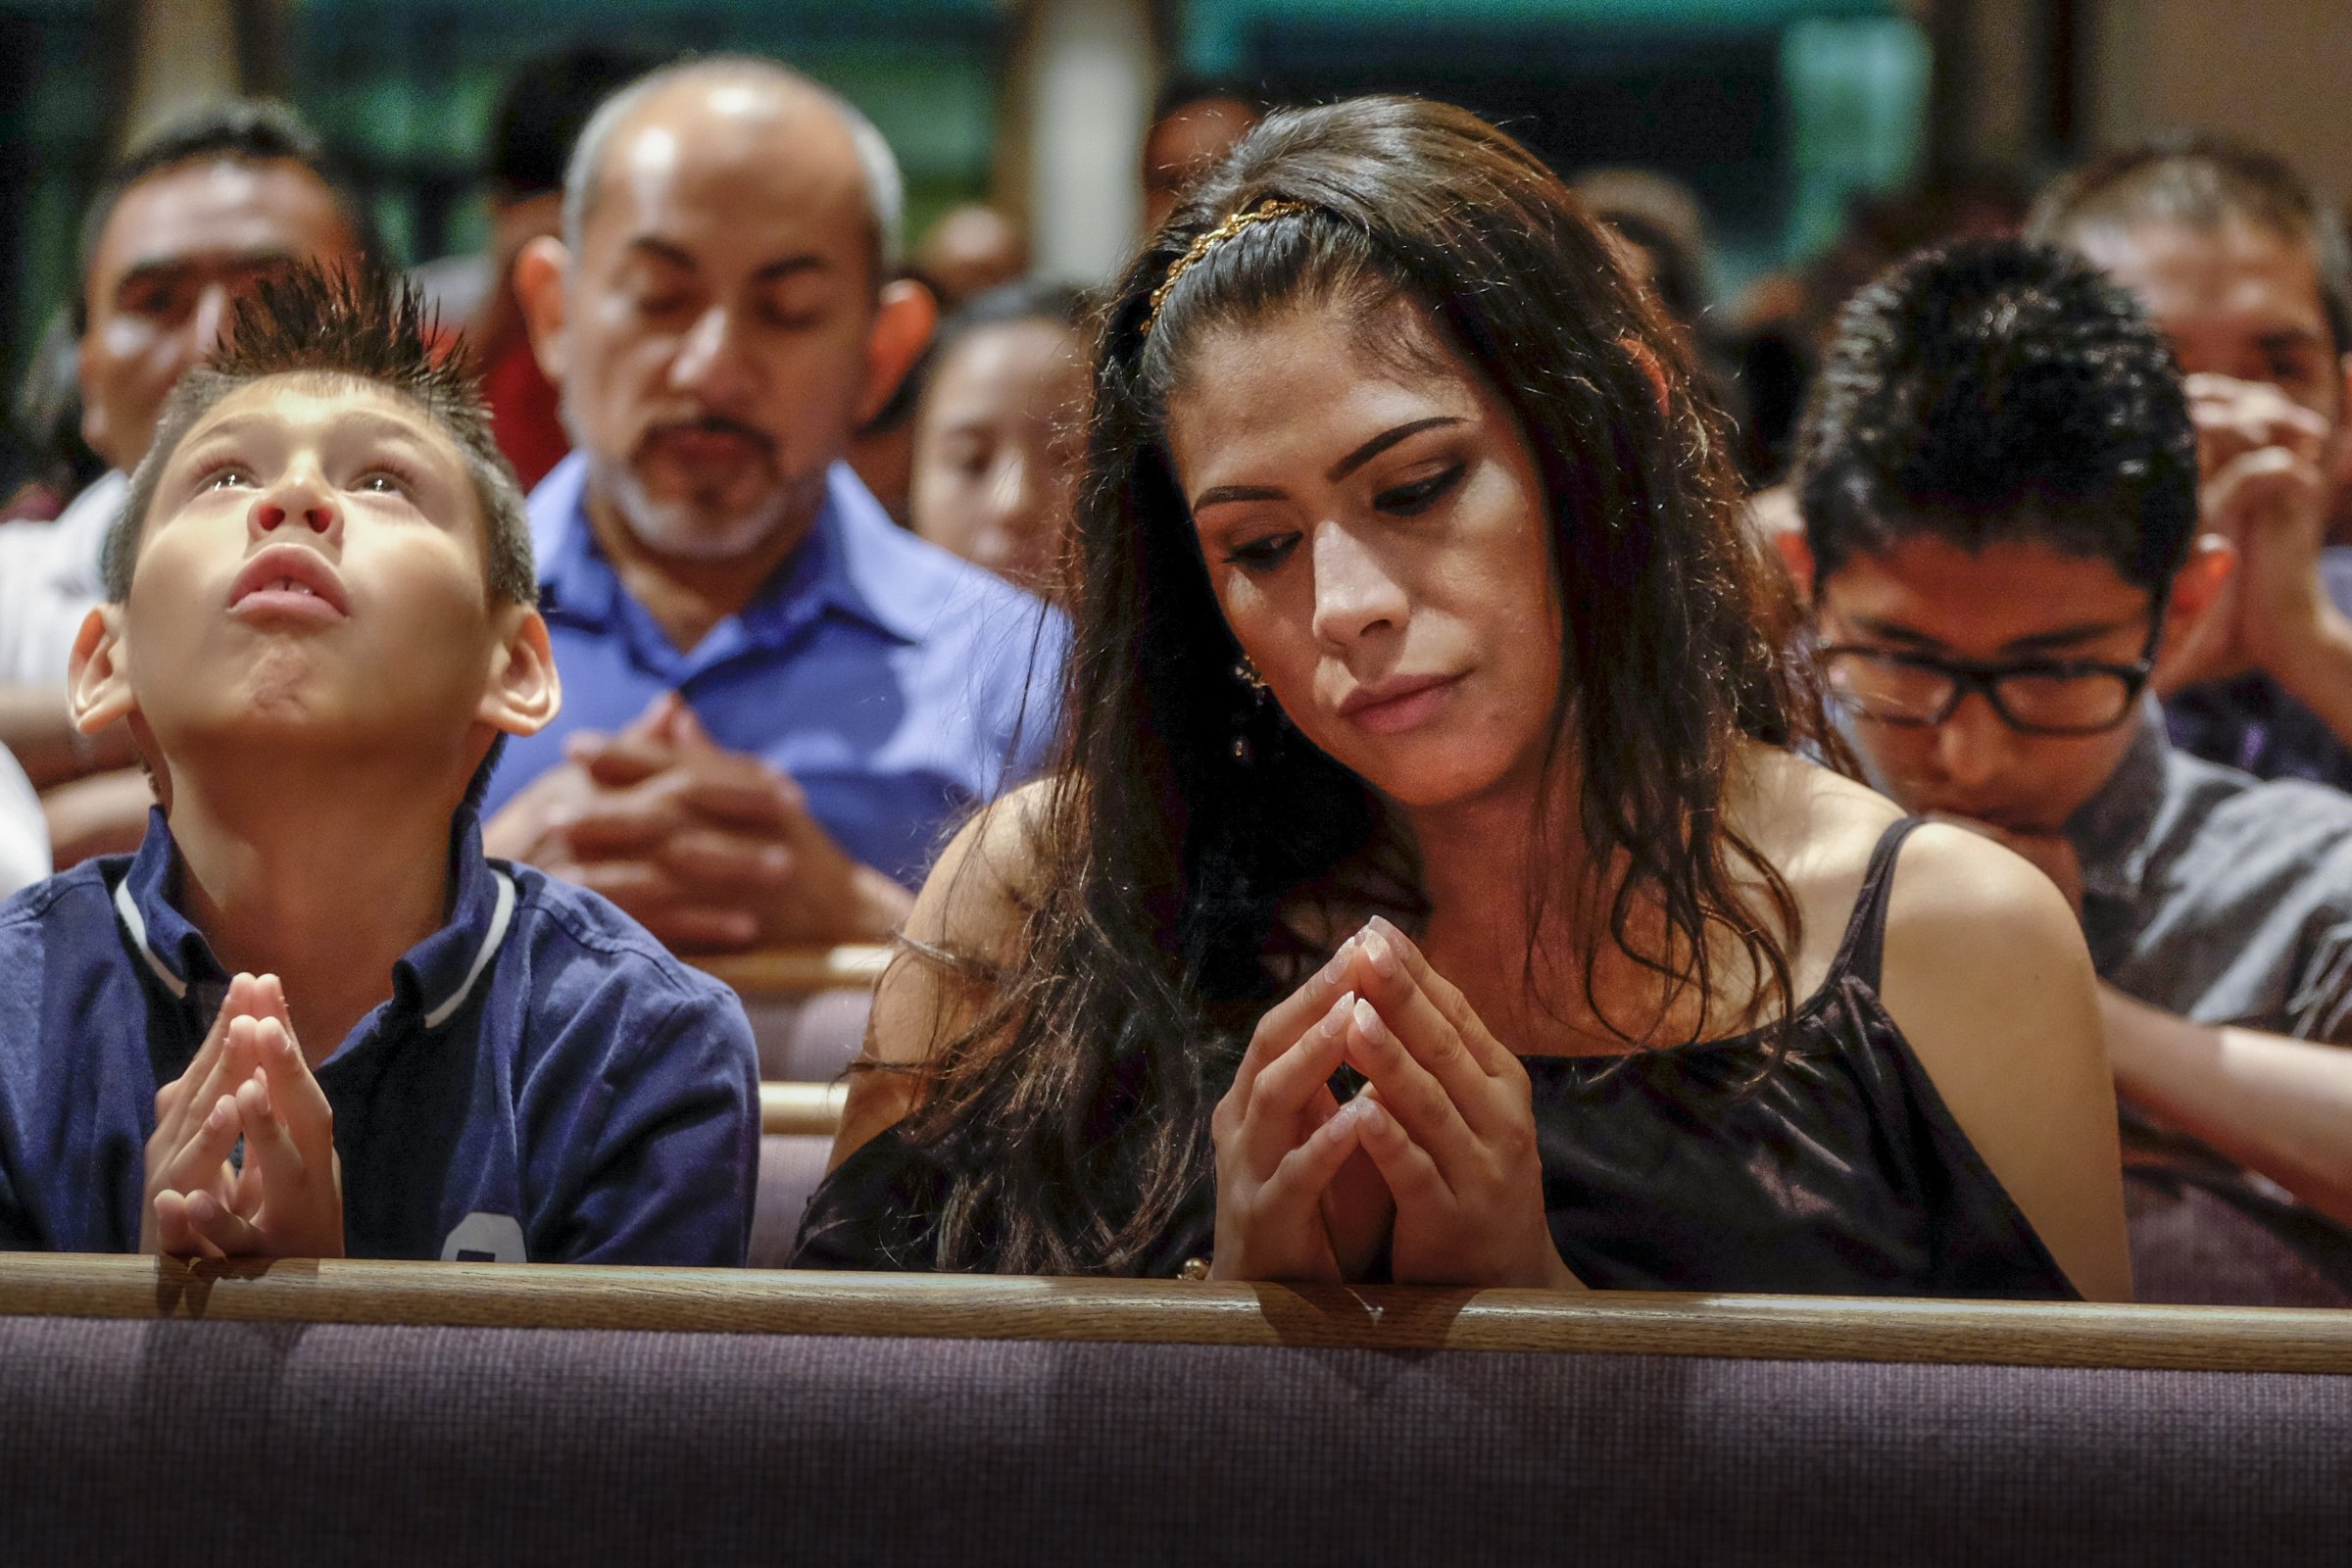 People in Nashville, Tenn., pray during the litany of saints at a Mass for the dedication of Sagrado Corazon Church in this 2016 file photo. (CNS photo/Rick Musacchio, Tennessee Register)